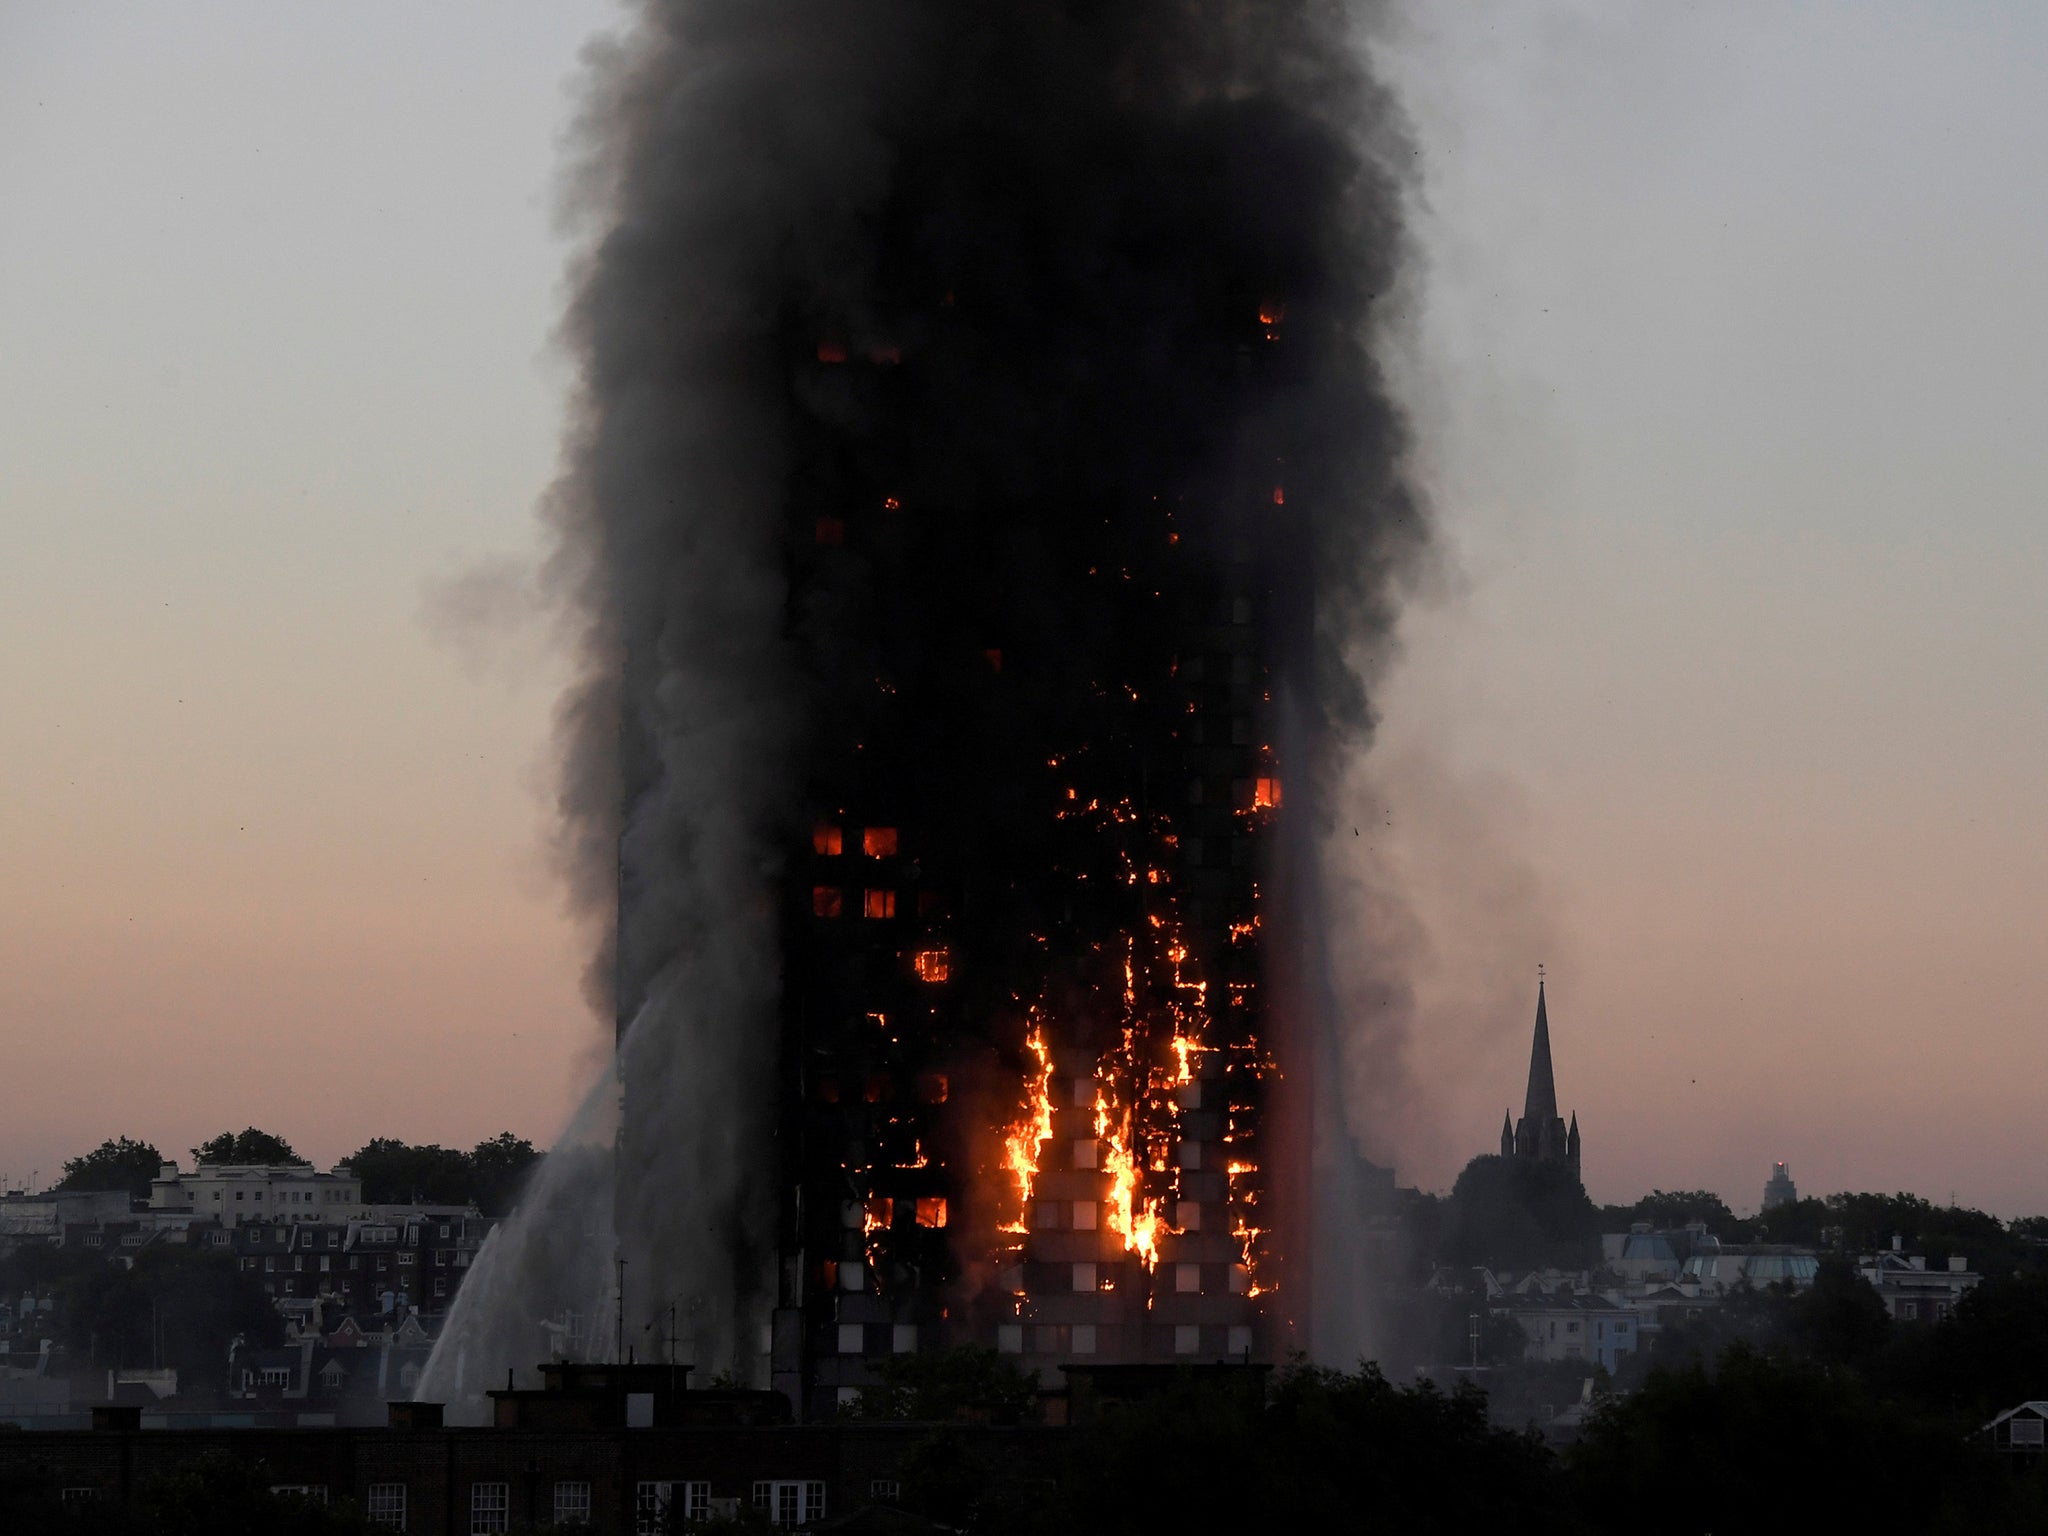 KPMG have provided auditing services to Rydon, the contractor that refurbished the tower before the blaze